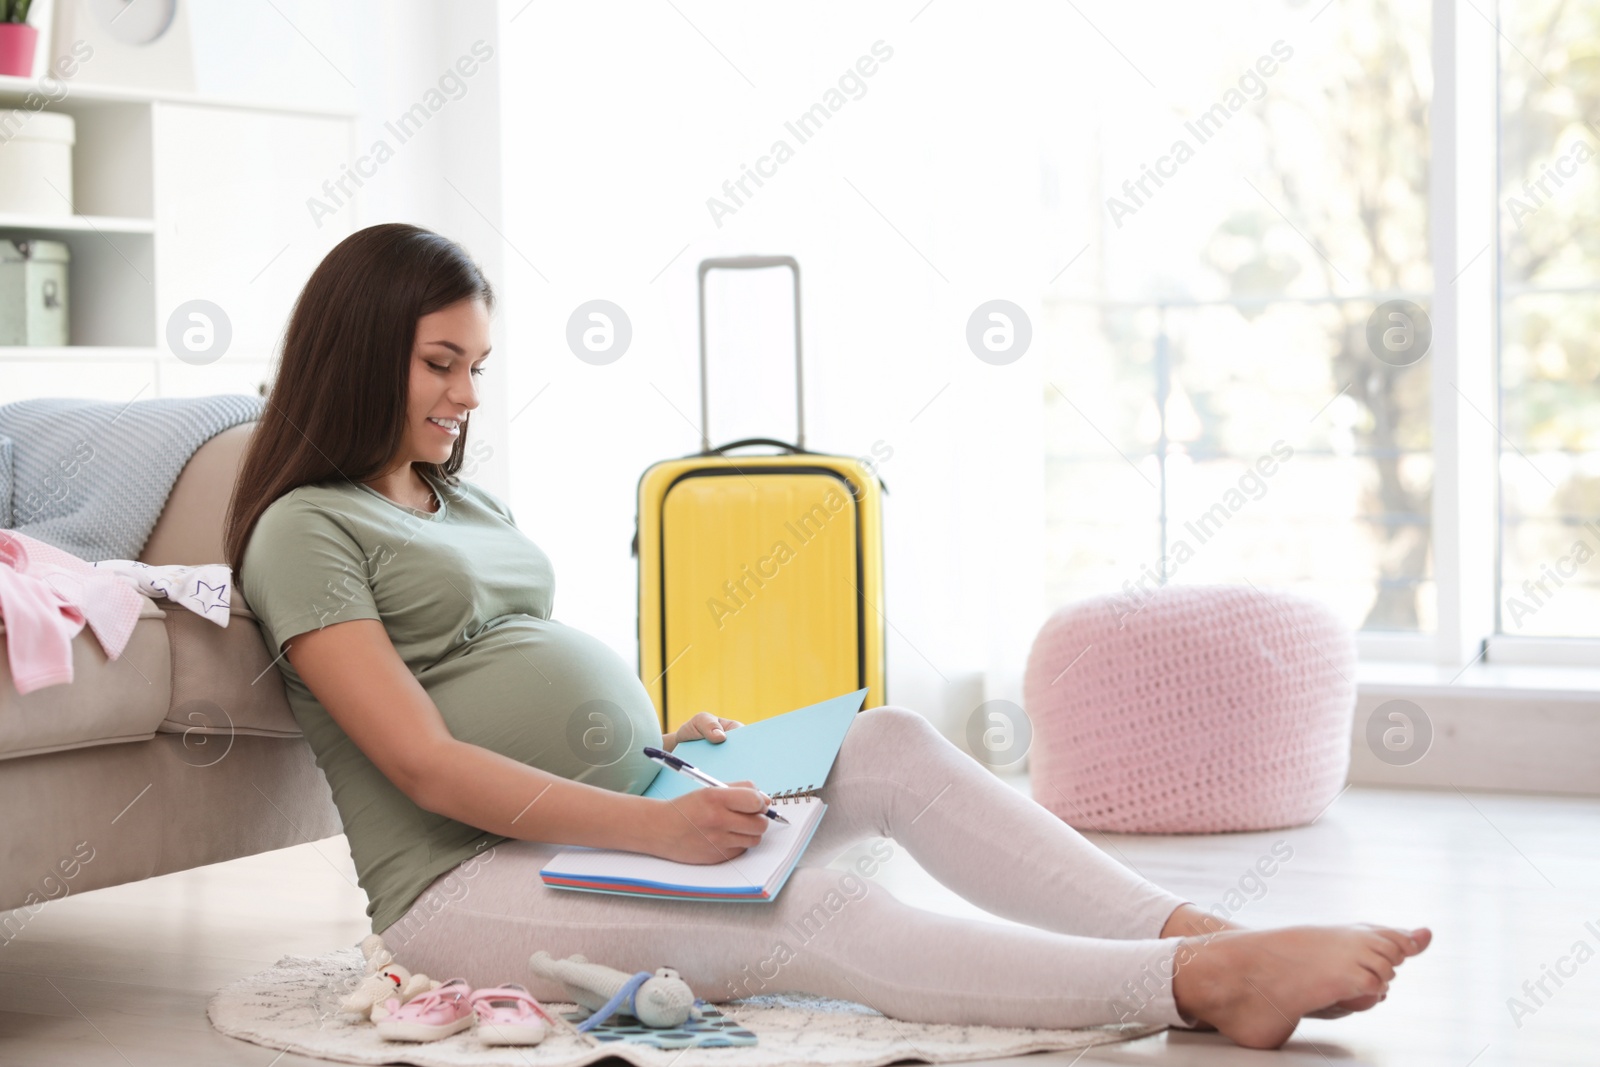 Photo of Pregnant woman making list while packing suitcase for maternity hospital in living room